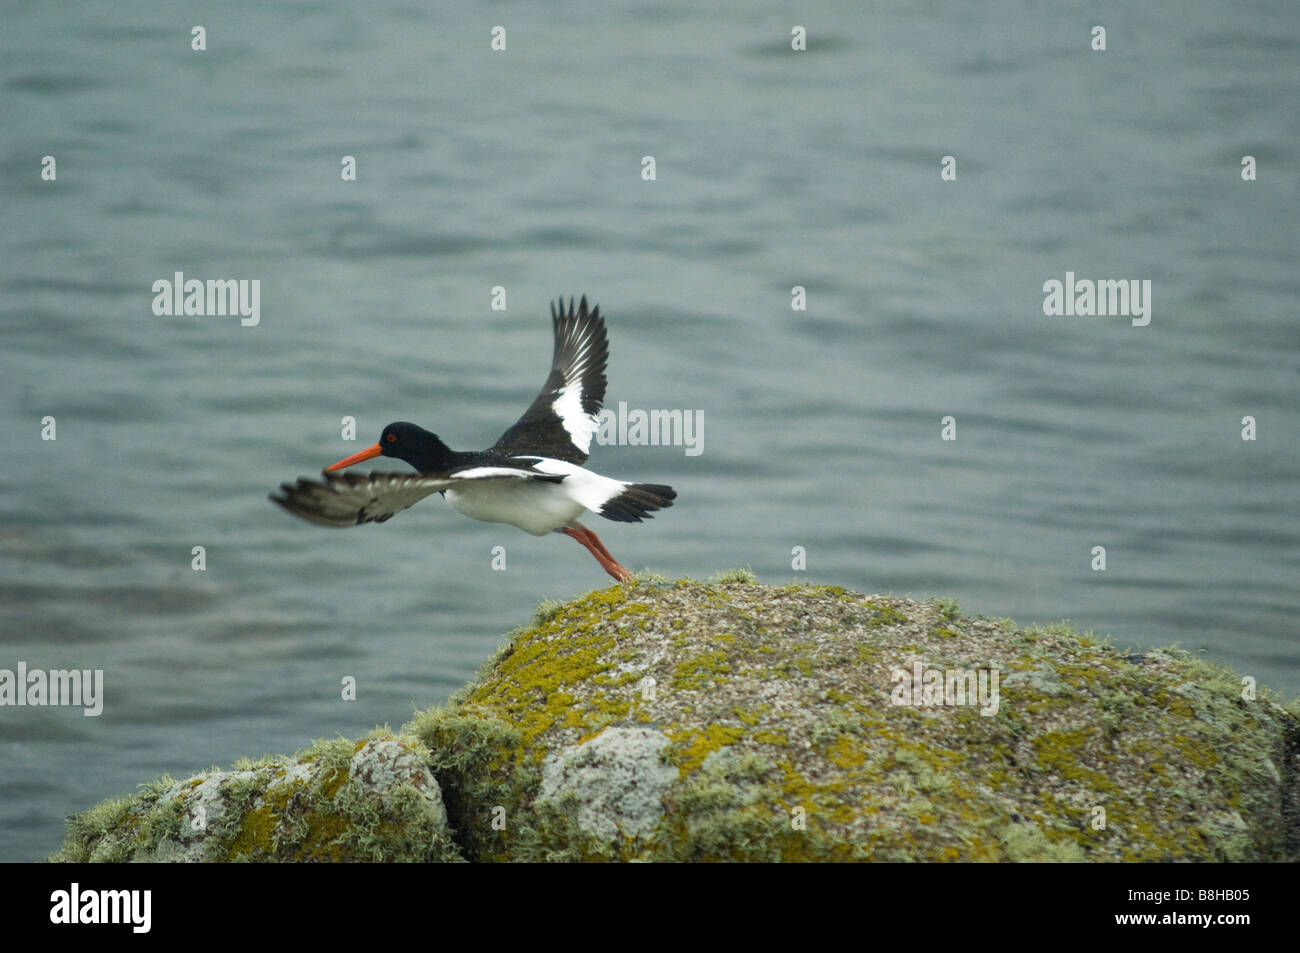 Oystercatcher taking off from rock with wings outspread at Old Grimsby, Stock Photo